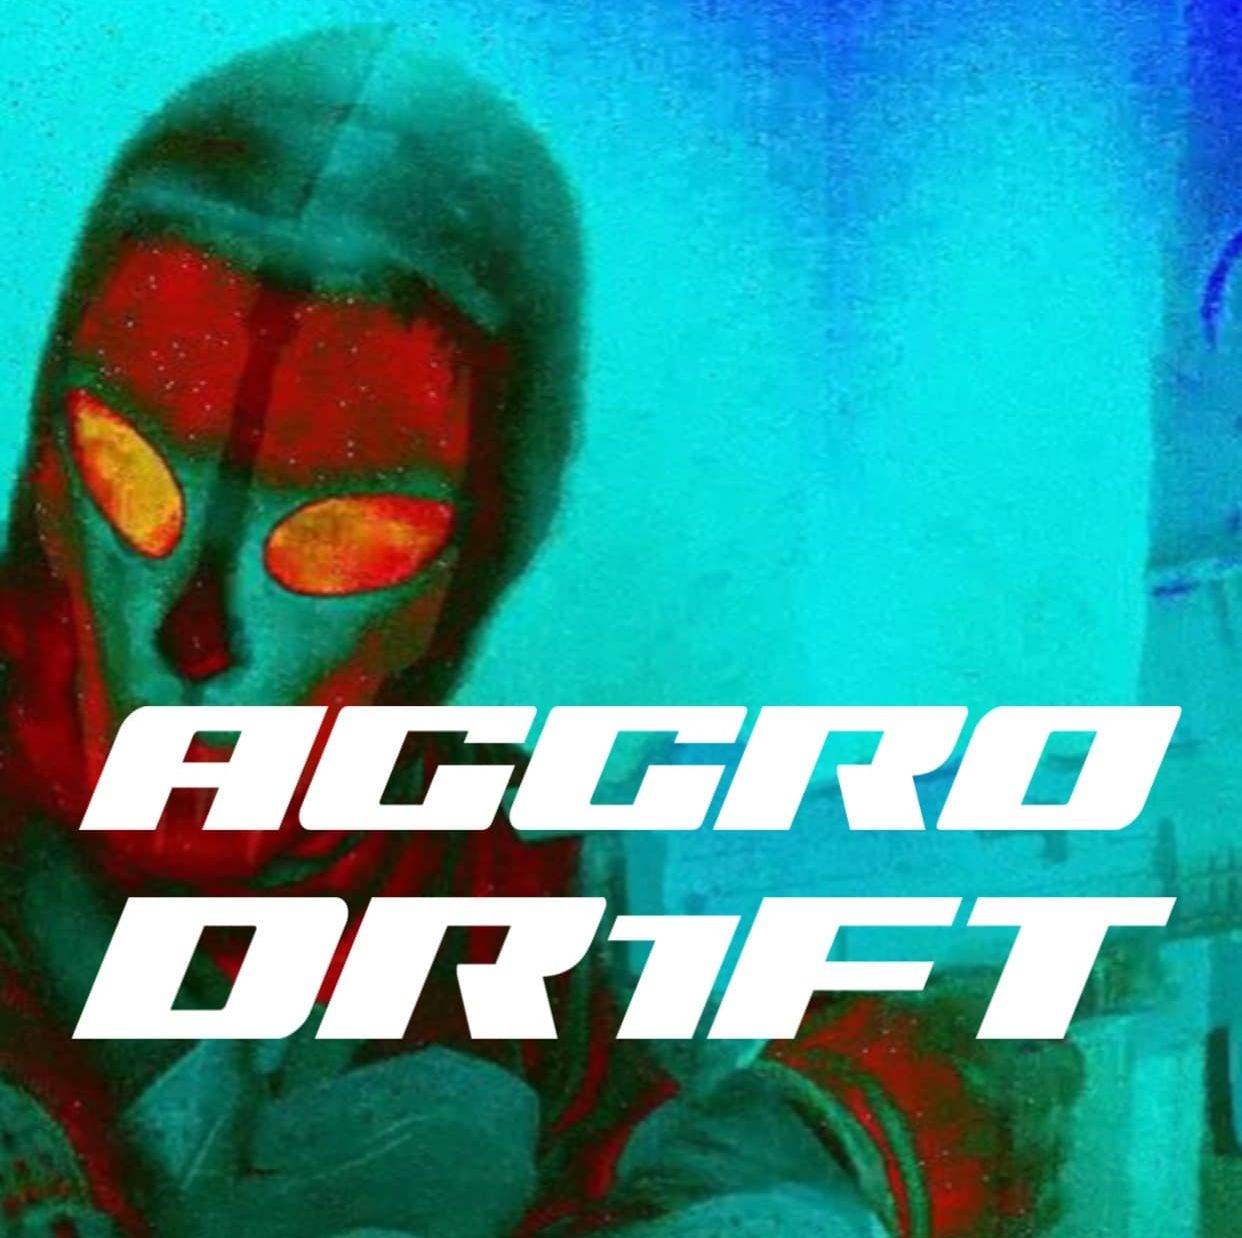 Travis Scott Takes A Cinematic Leap In Harmony Korine'S 'Aggro Dr1Ft', Yours Truly, News, May 18, 2024